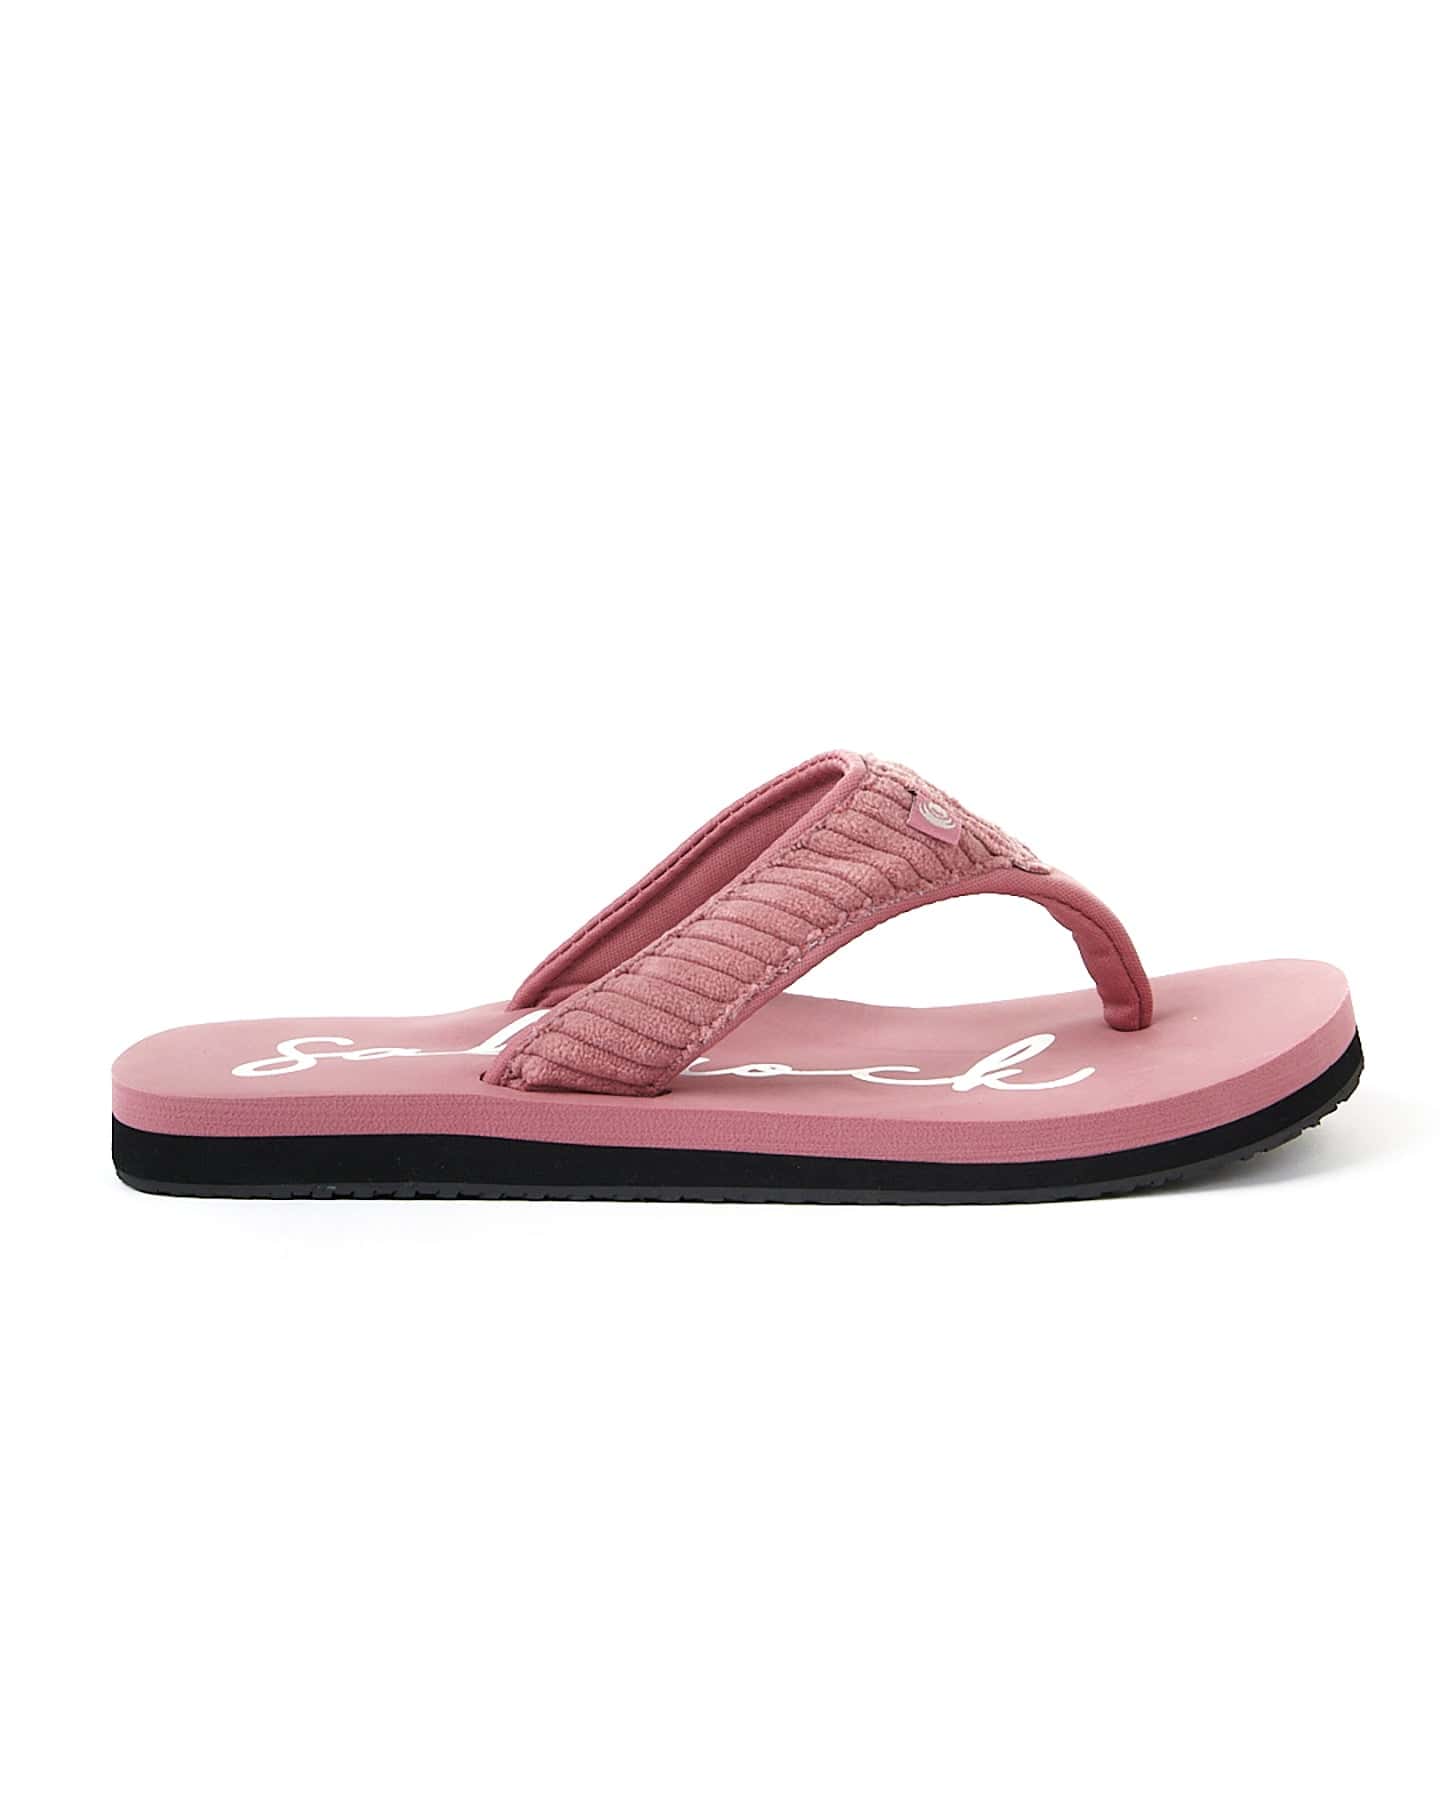 A Laguna - Womens Cord Flip Flops - Mid Pink from Saltrock offers great comfort with its soft sole and vibrant color.